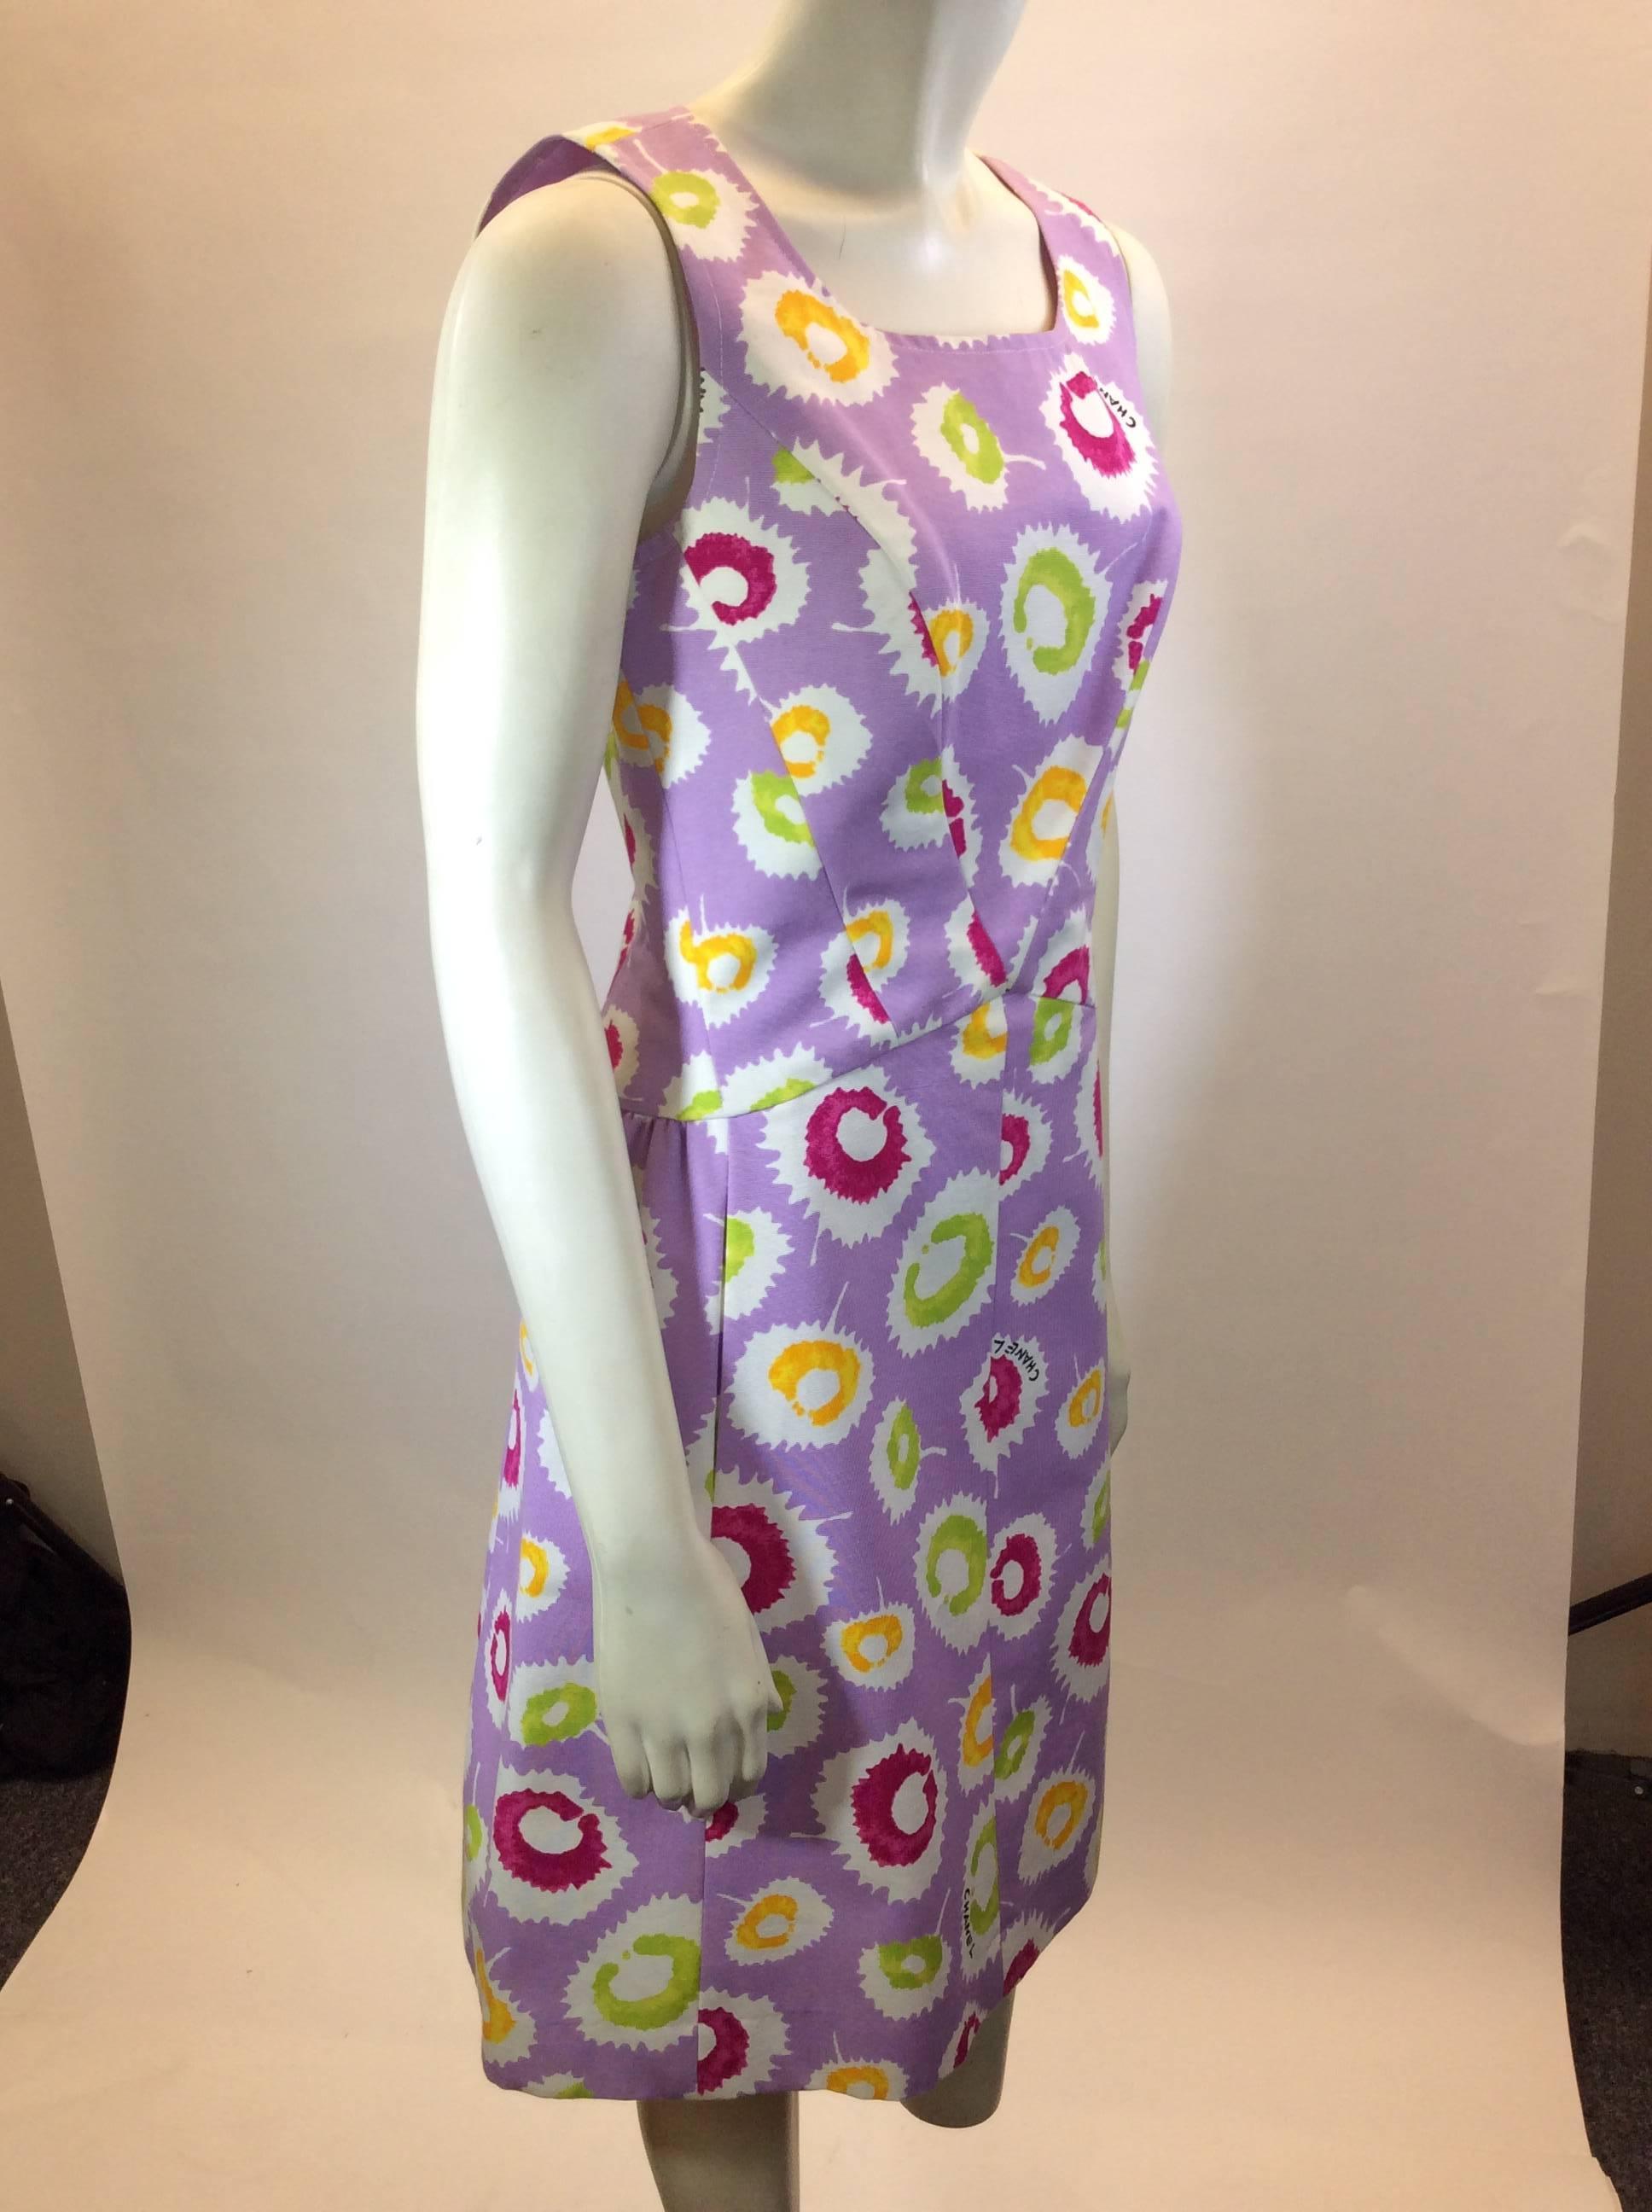 Sleeveless lavender Chanel dress with orange, pink and green circle prints. 100% silk lining. Zip up back 